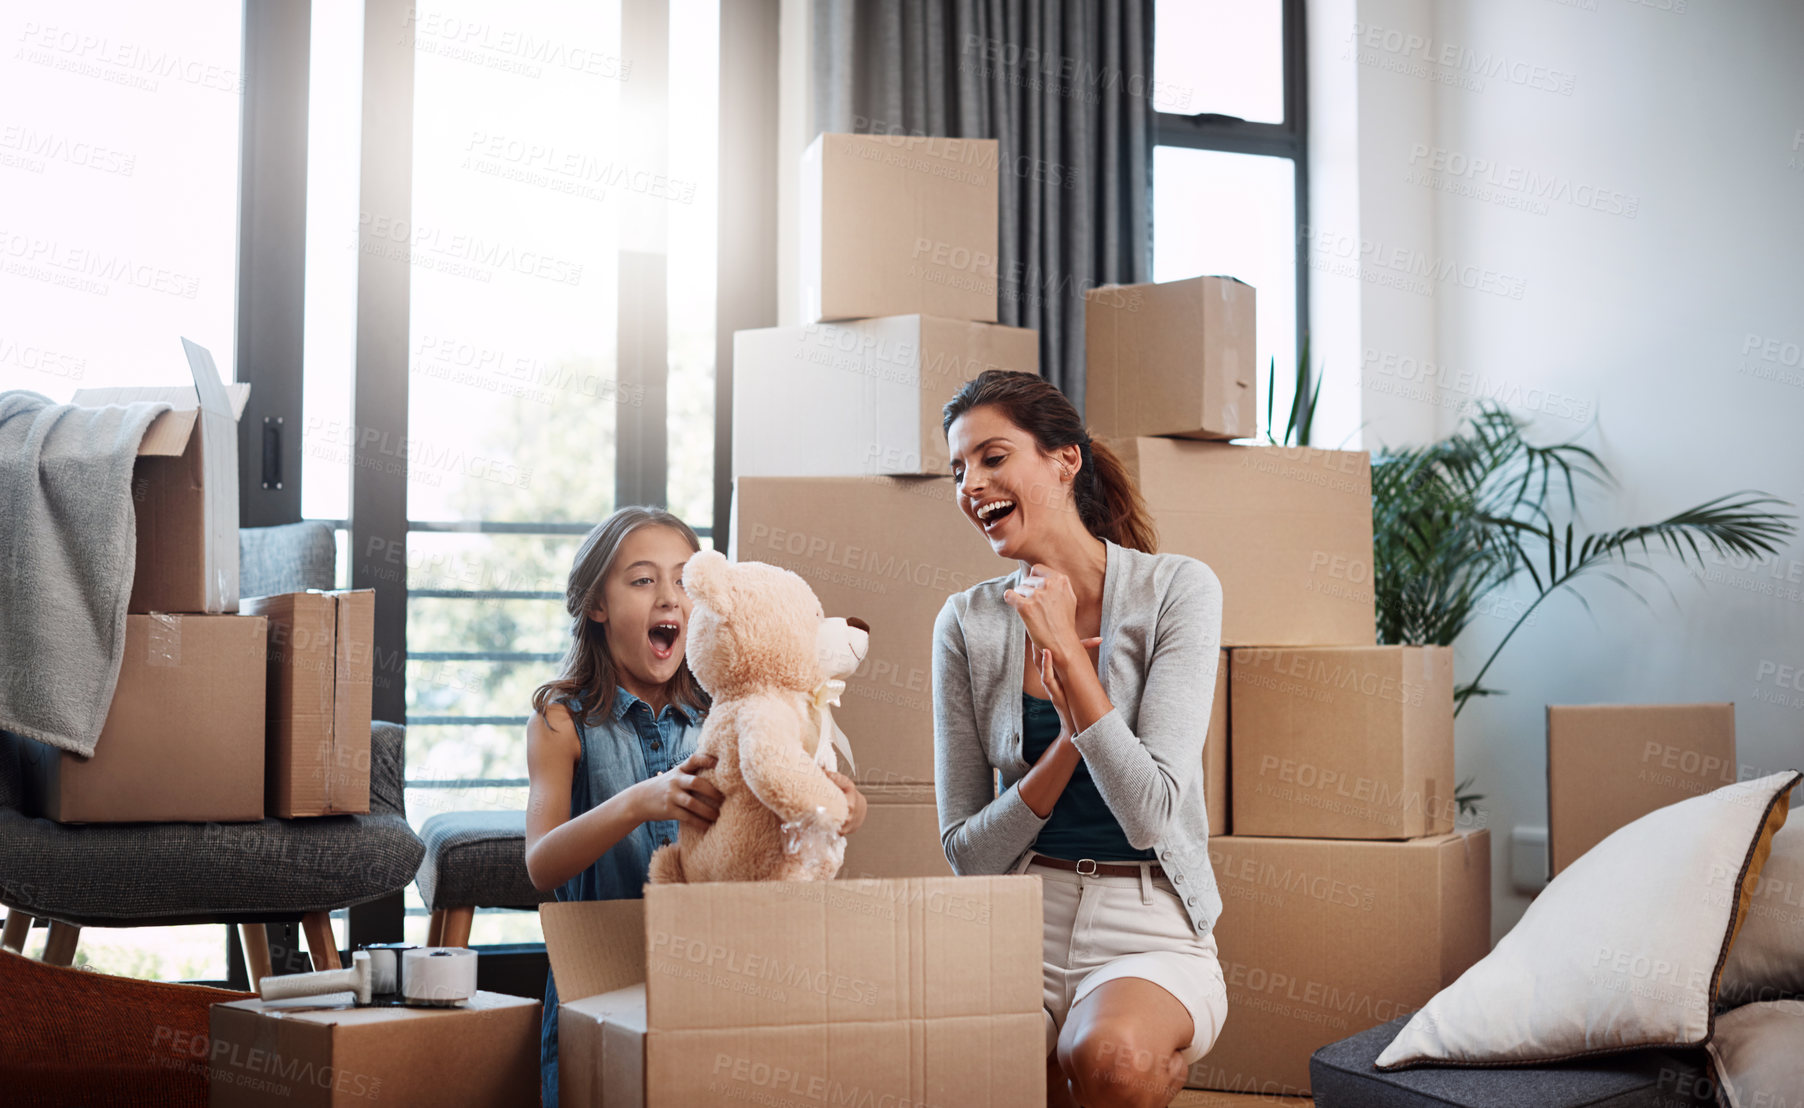 Buy stock photo Cropped shot of an attractive young woman and her daughter moving into a new house